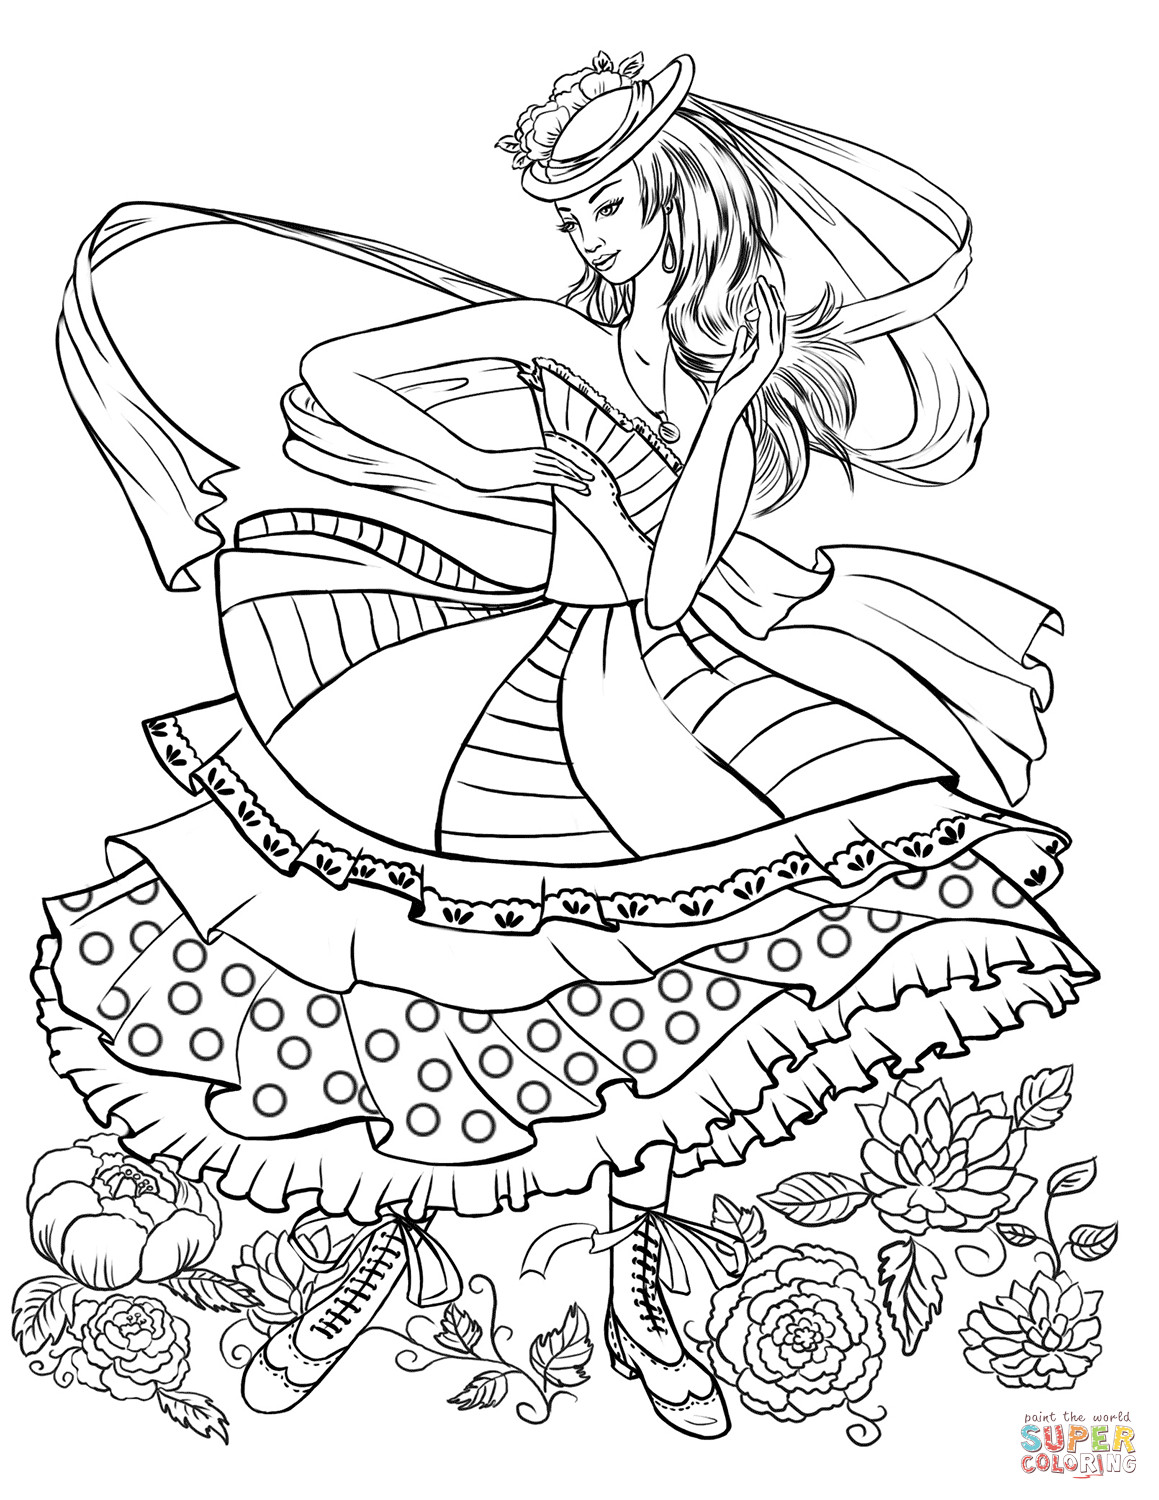 Fashion Girl Coloring Book
 Girl Dancing in a Vintage Fashion Clothing coloring page